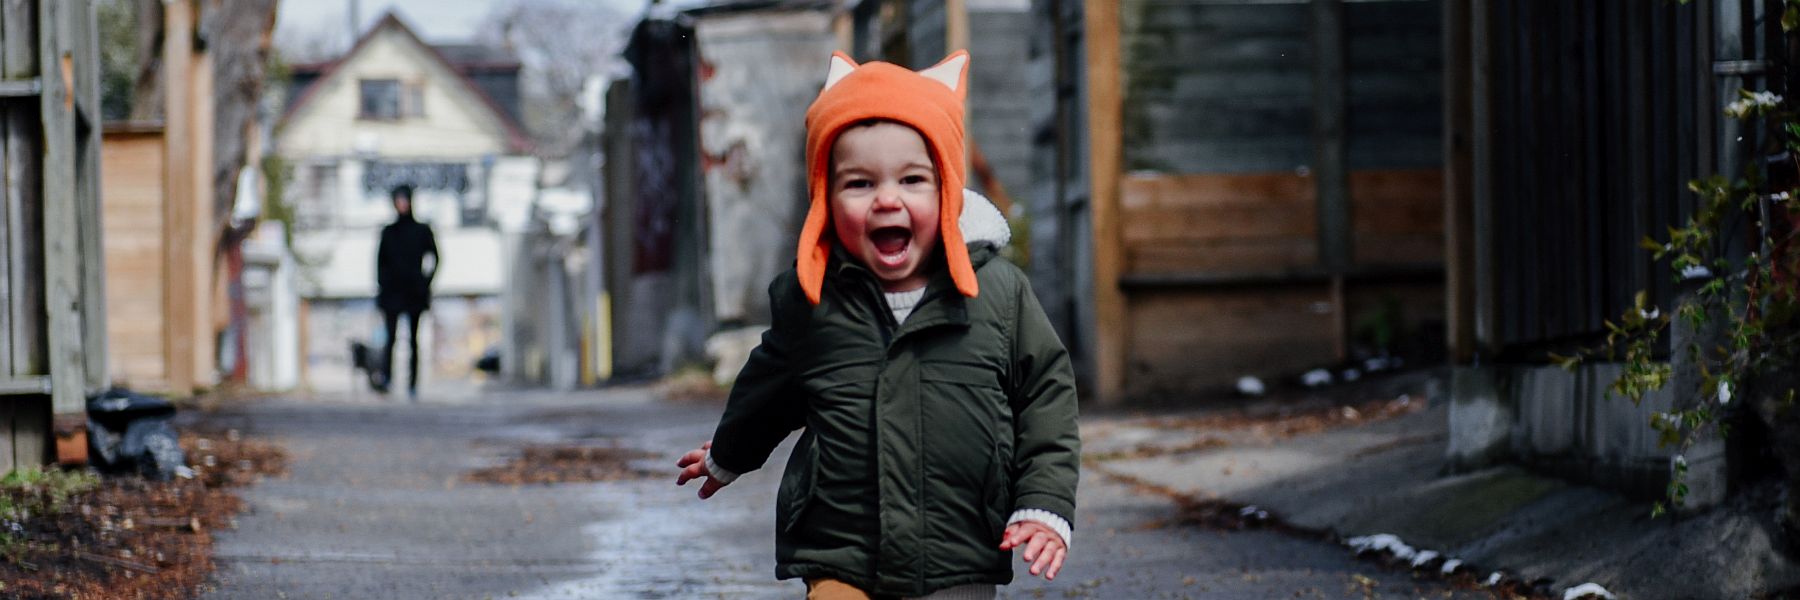 Puffin Gear's Kids Animal Hats spark imaginative outdoor play.  Made in Canada for cold weather. A chinwrap keeps out all the cold. Polartec Fleece is incredibly warm, quick dry and machine washable.  Hand-me-down quality you'll love.